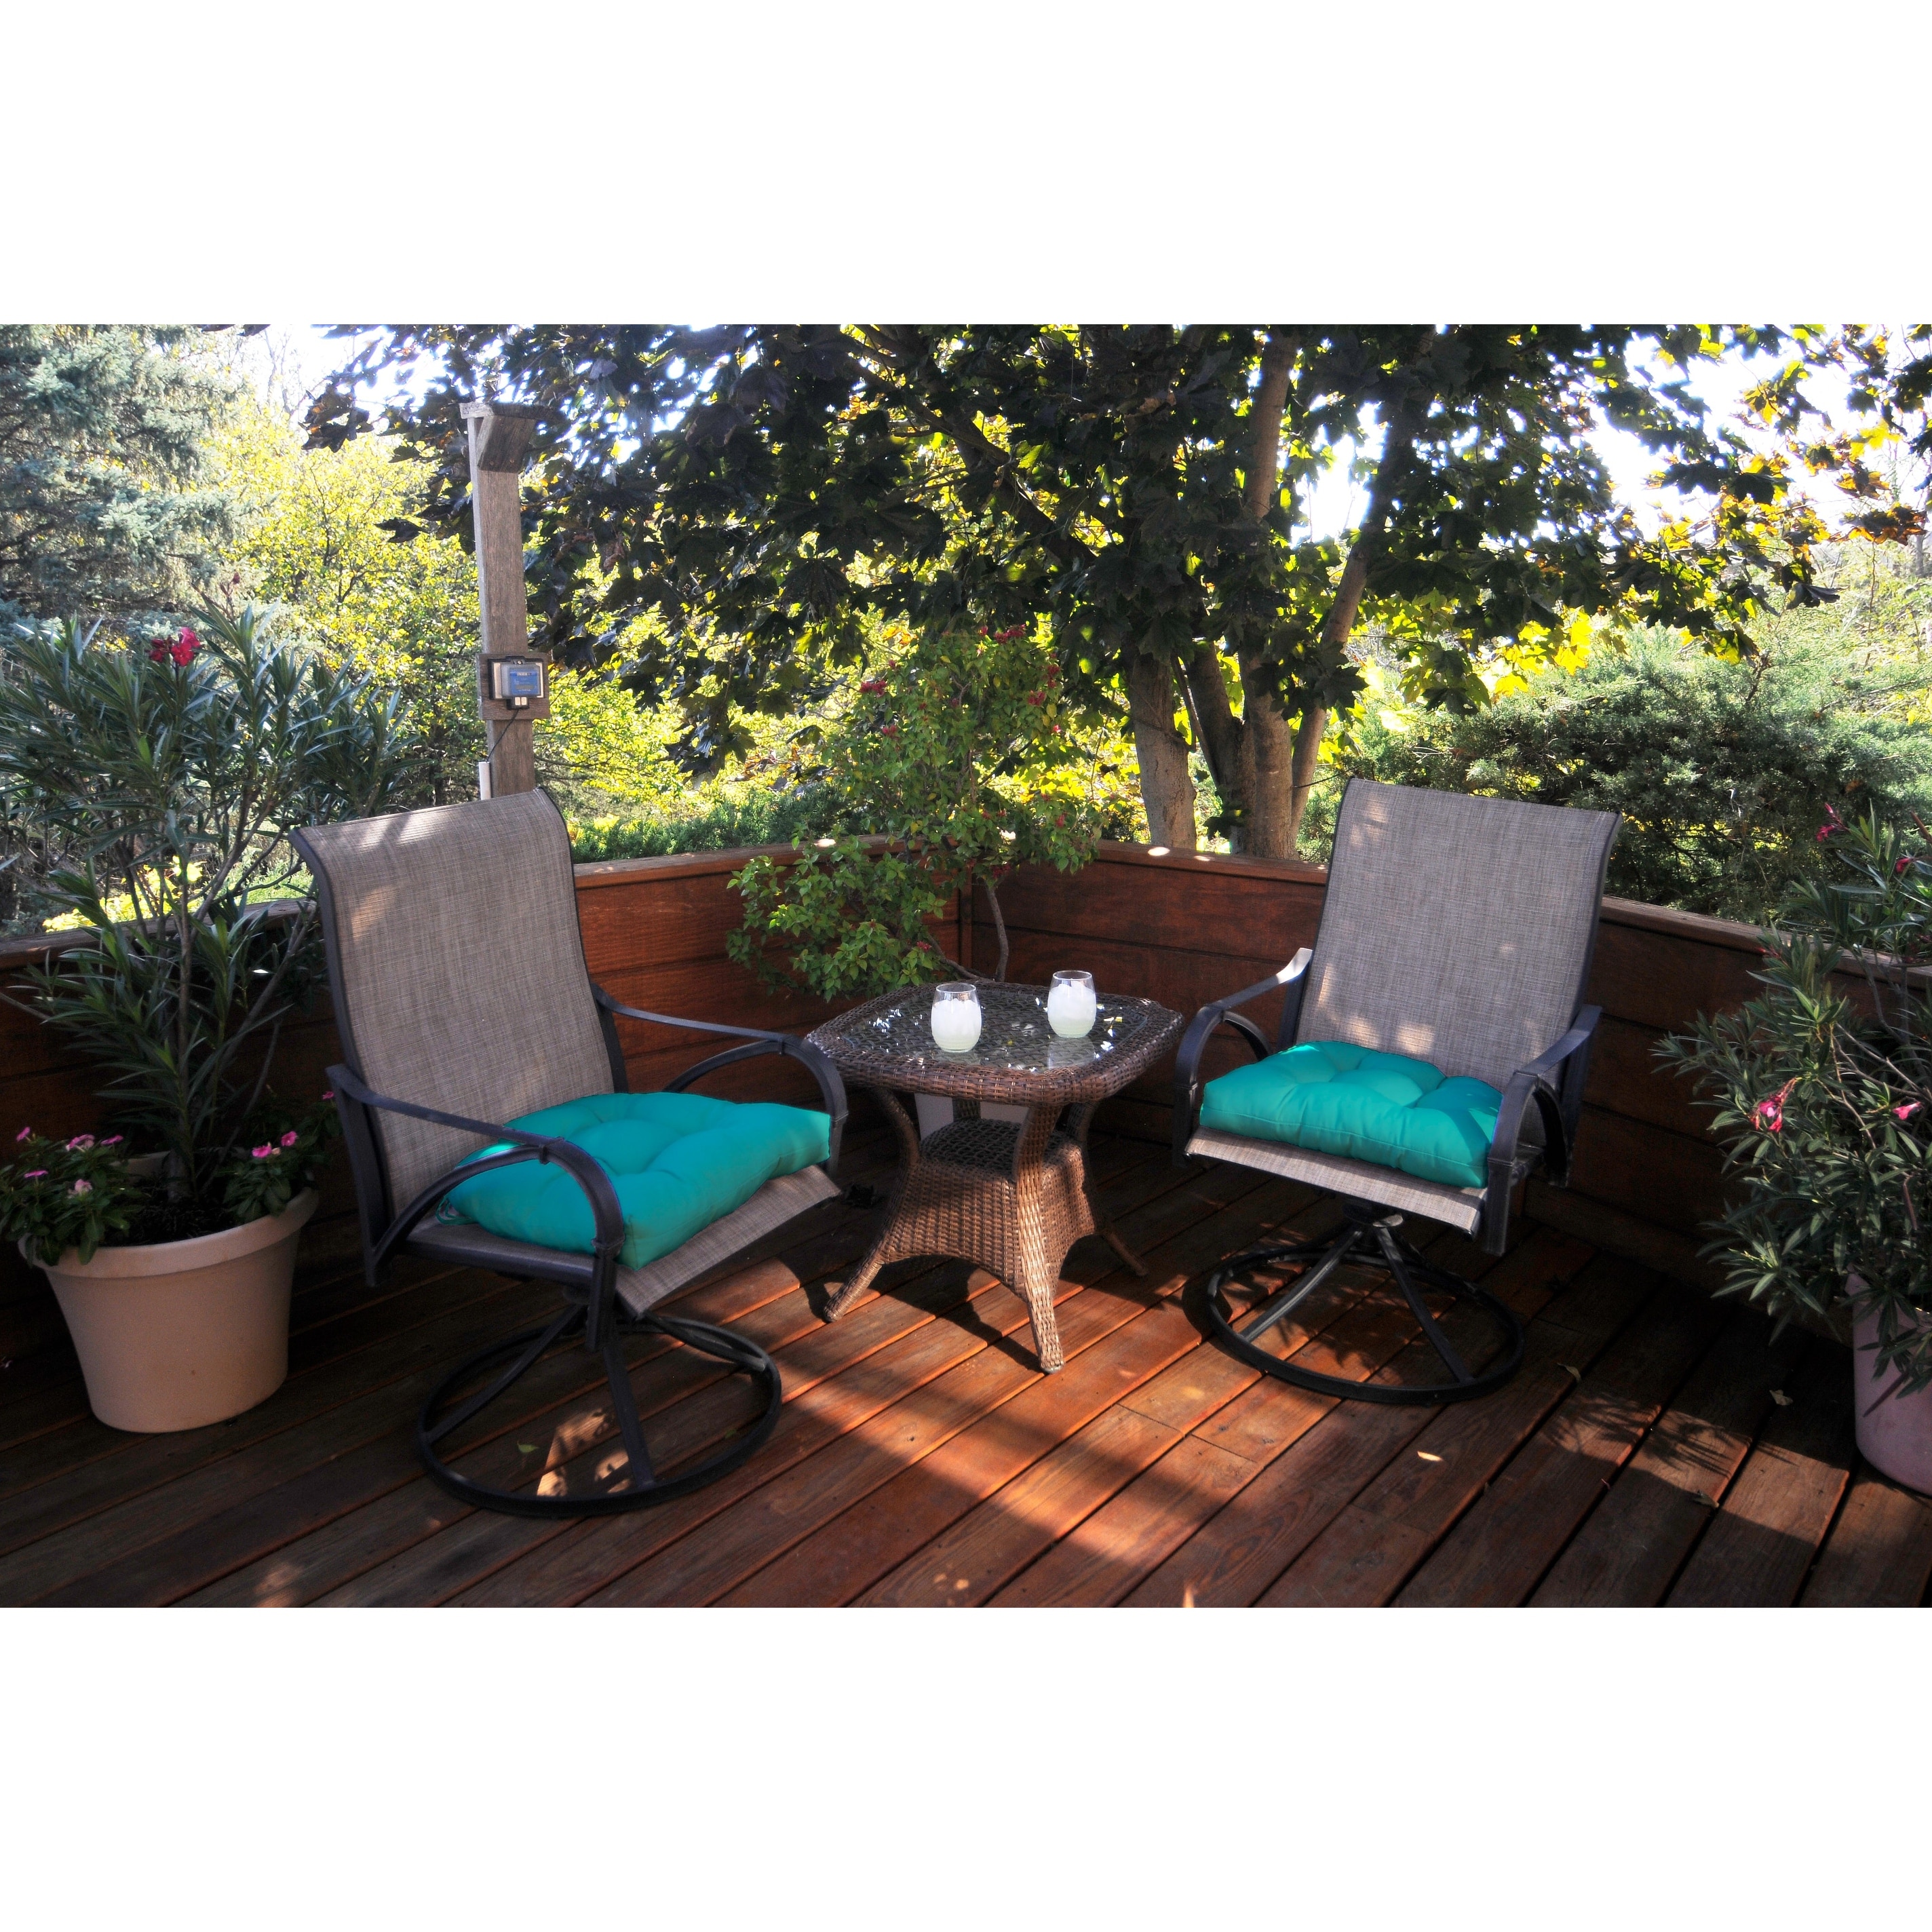 https://ak1.ostkcdn.com/images/products/is/images/direct/00058f11d7cf2322af14743244d99d20f84ad21f/Indoor--Outdoor-Patio-D-or-Seat-Cushion.jpg